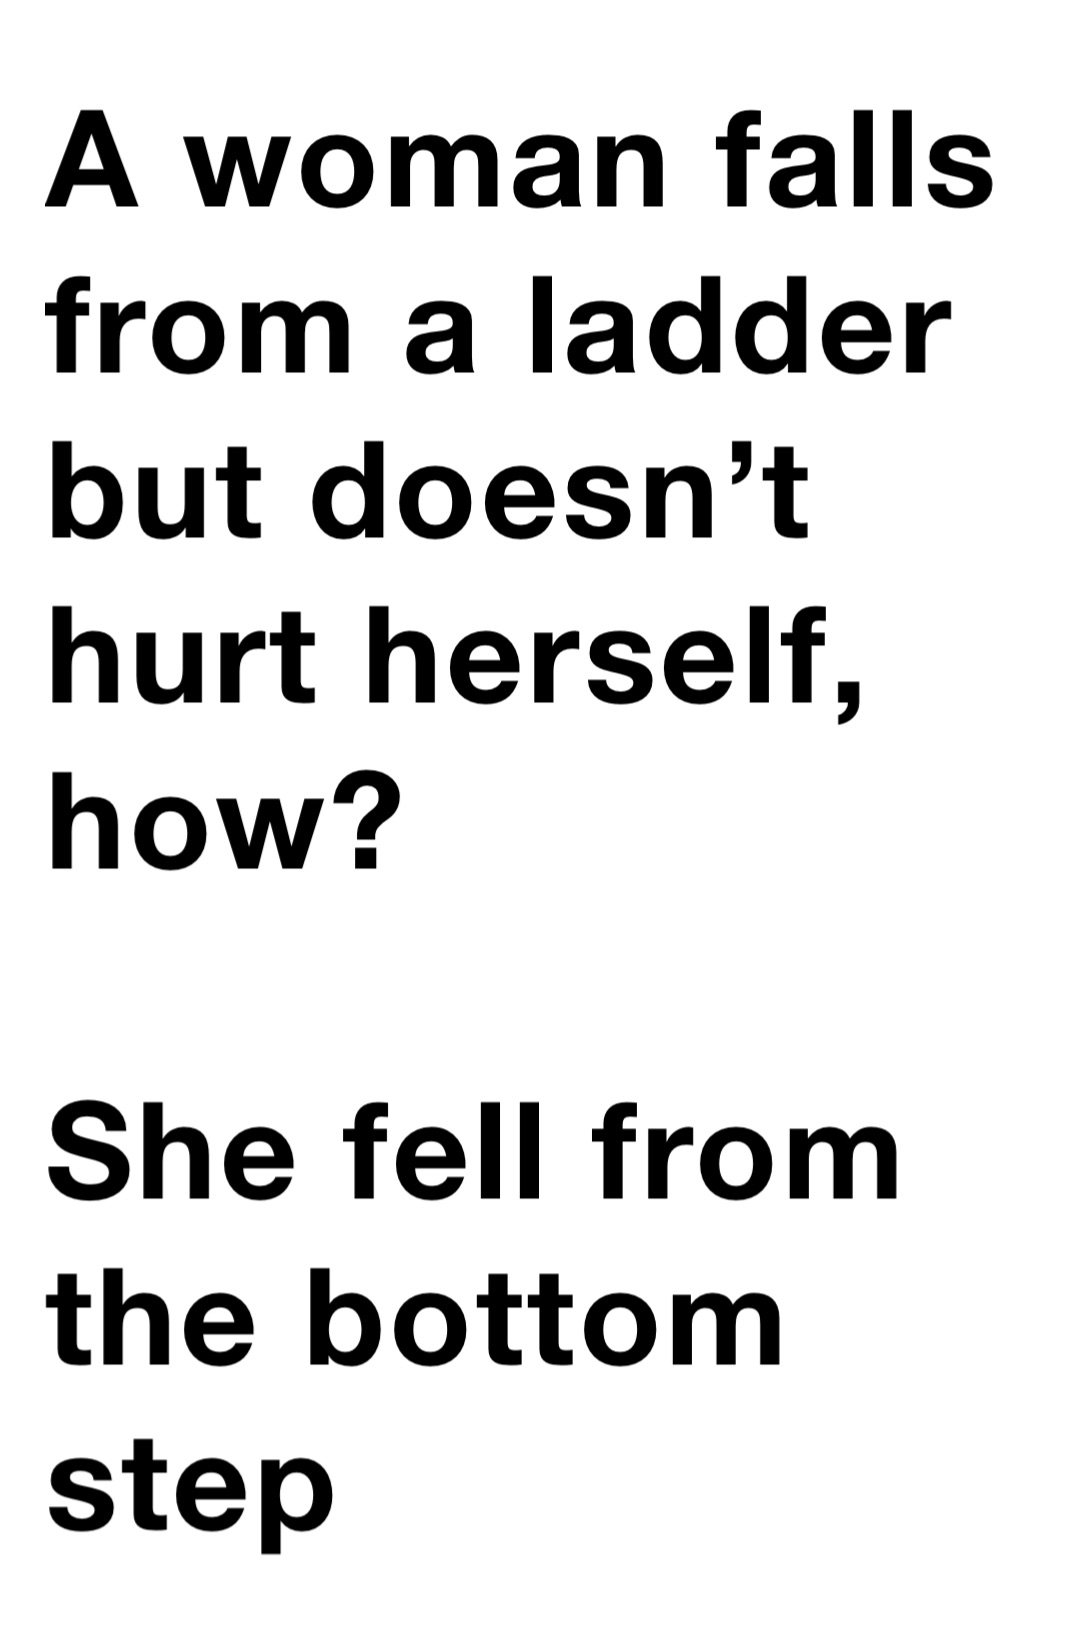 A woman falls from a ladder but doesn’t hurt herself, how?

She fell from the bottom step